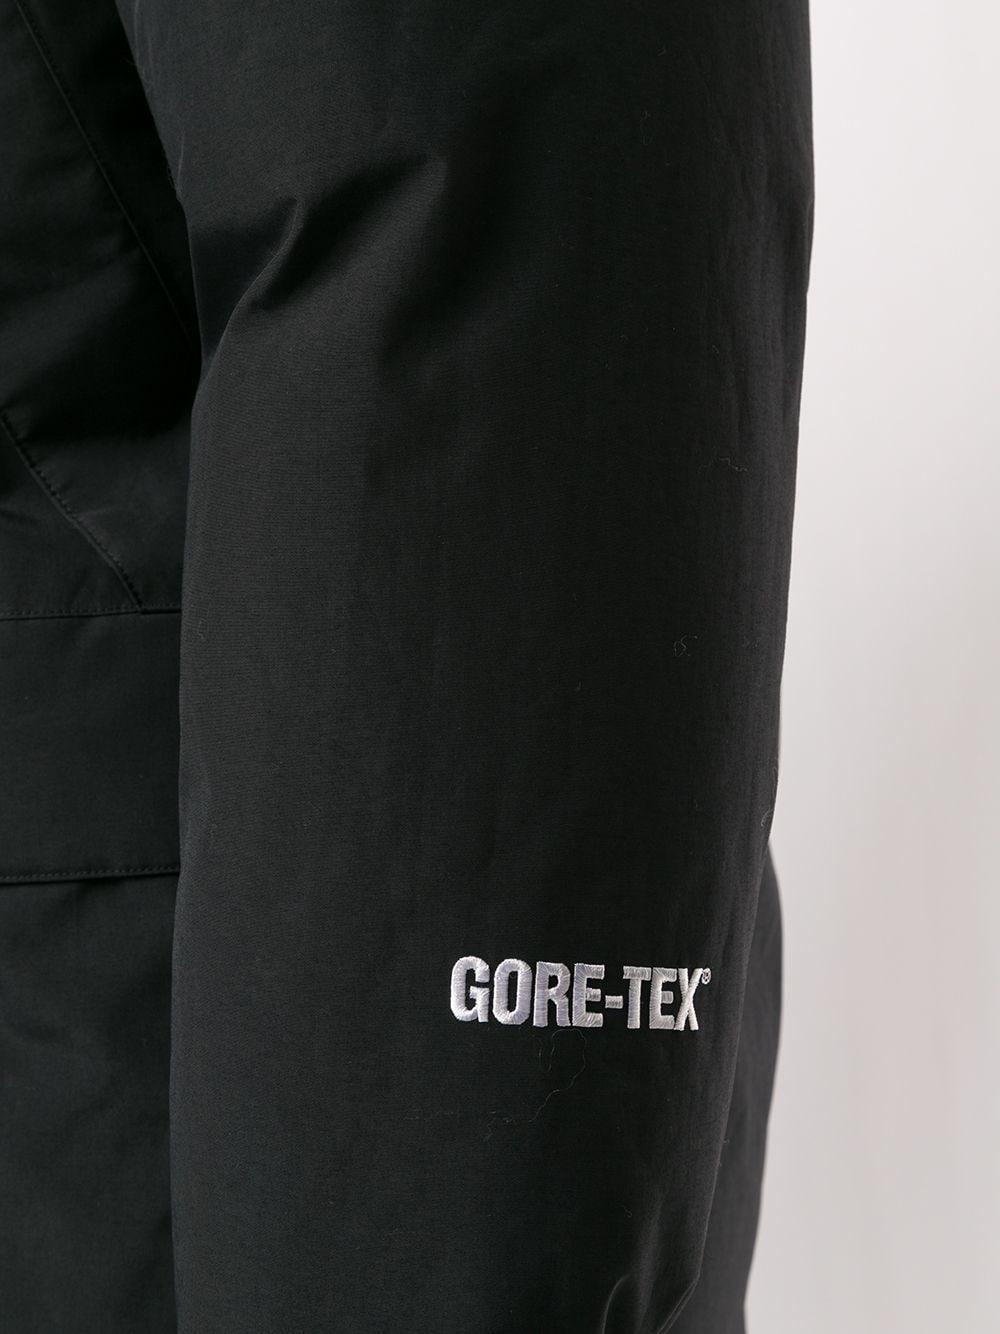 Supreme Gore-tex 700-fill Down Jacket in Black for Men | Lyst